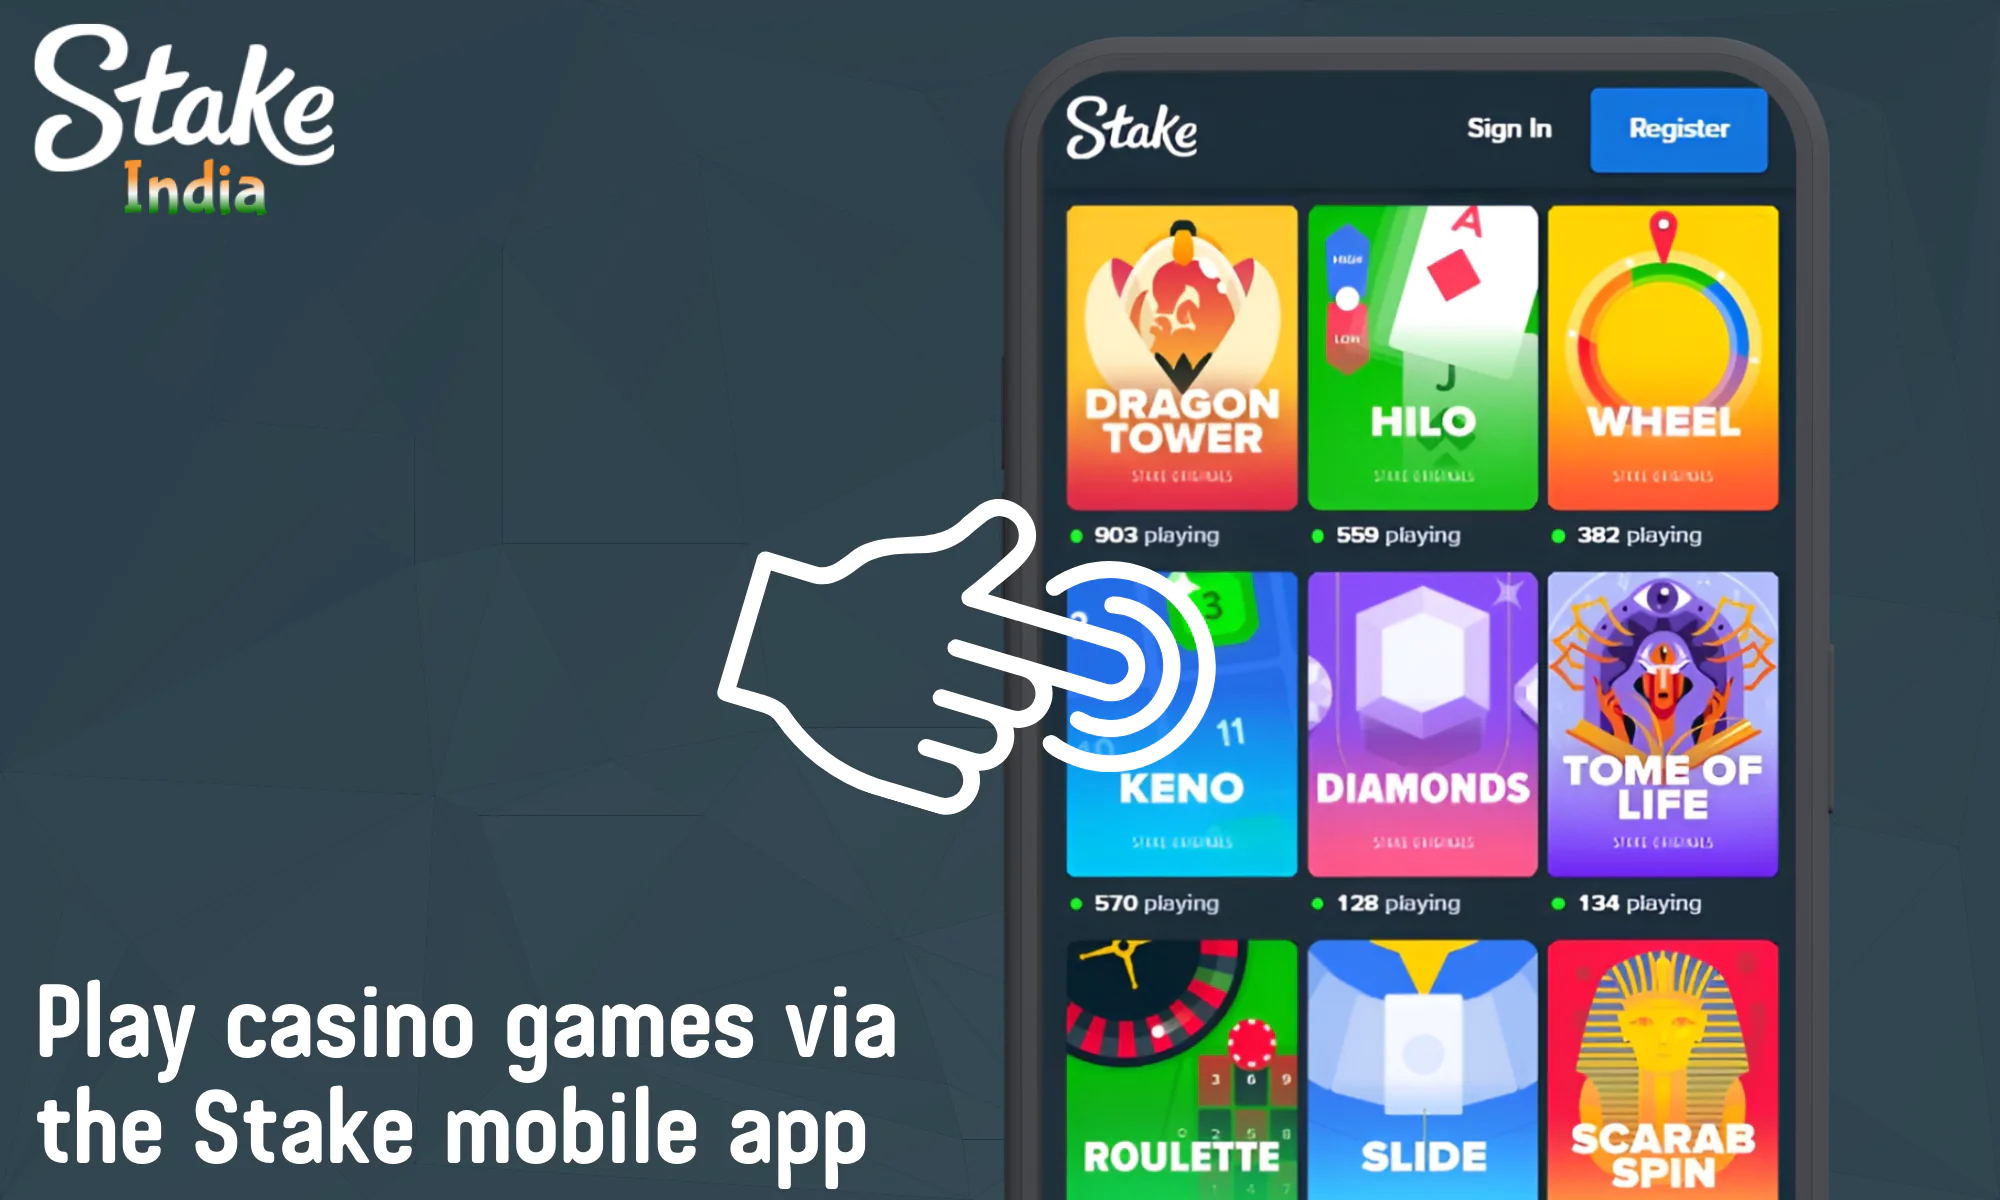 The casino section of the Stake app contains more than 3400 exciting games of various types